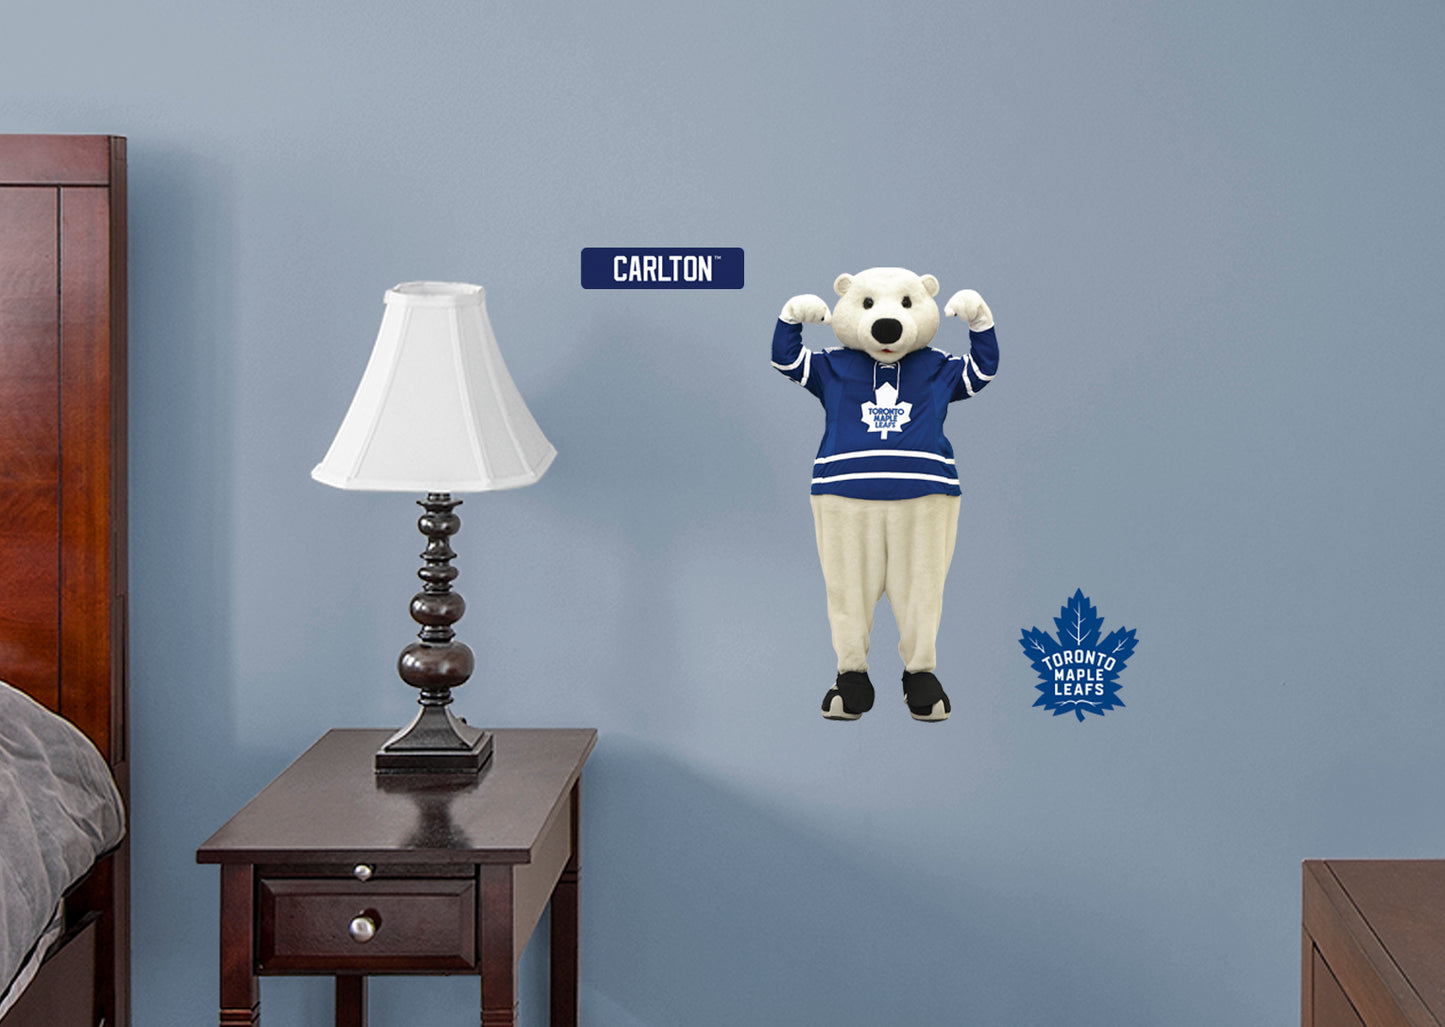 Toronto Maple Leafs: Carlton  Mascot        - Officially Licensed NHL Removable Wall   Adhesive Decal